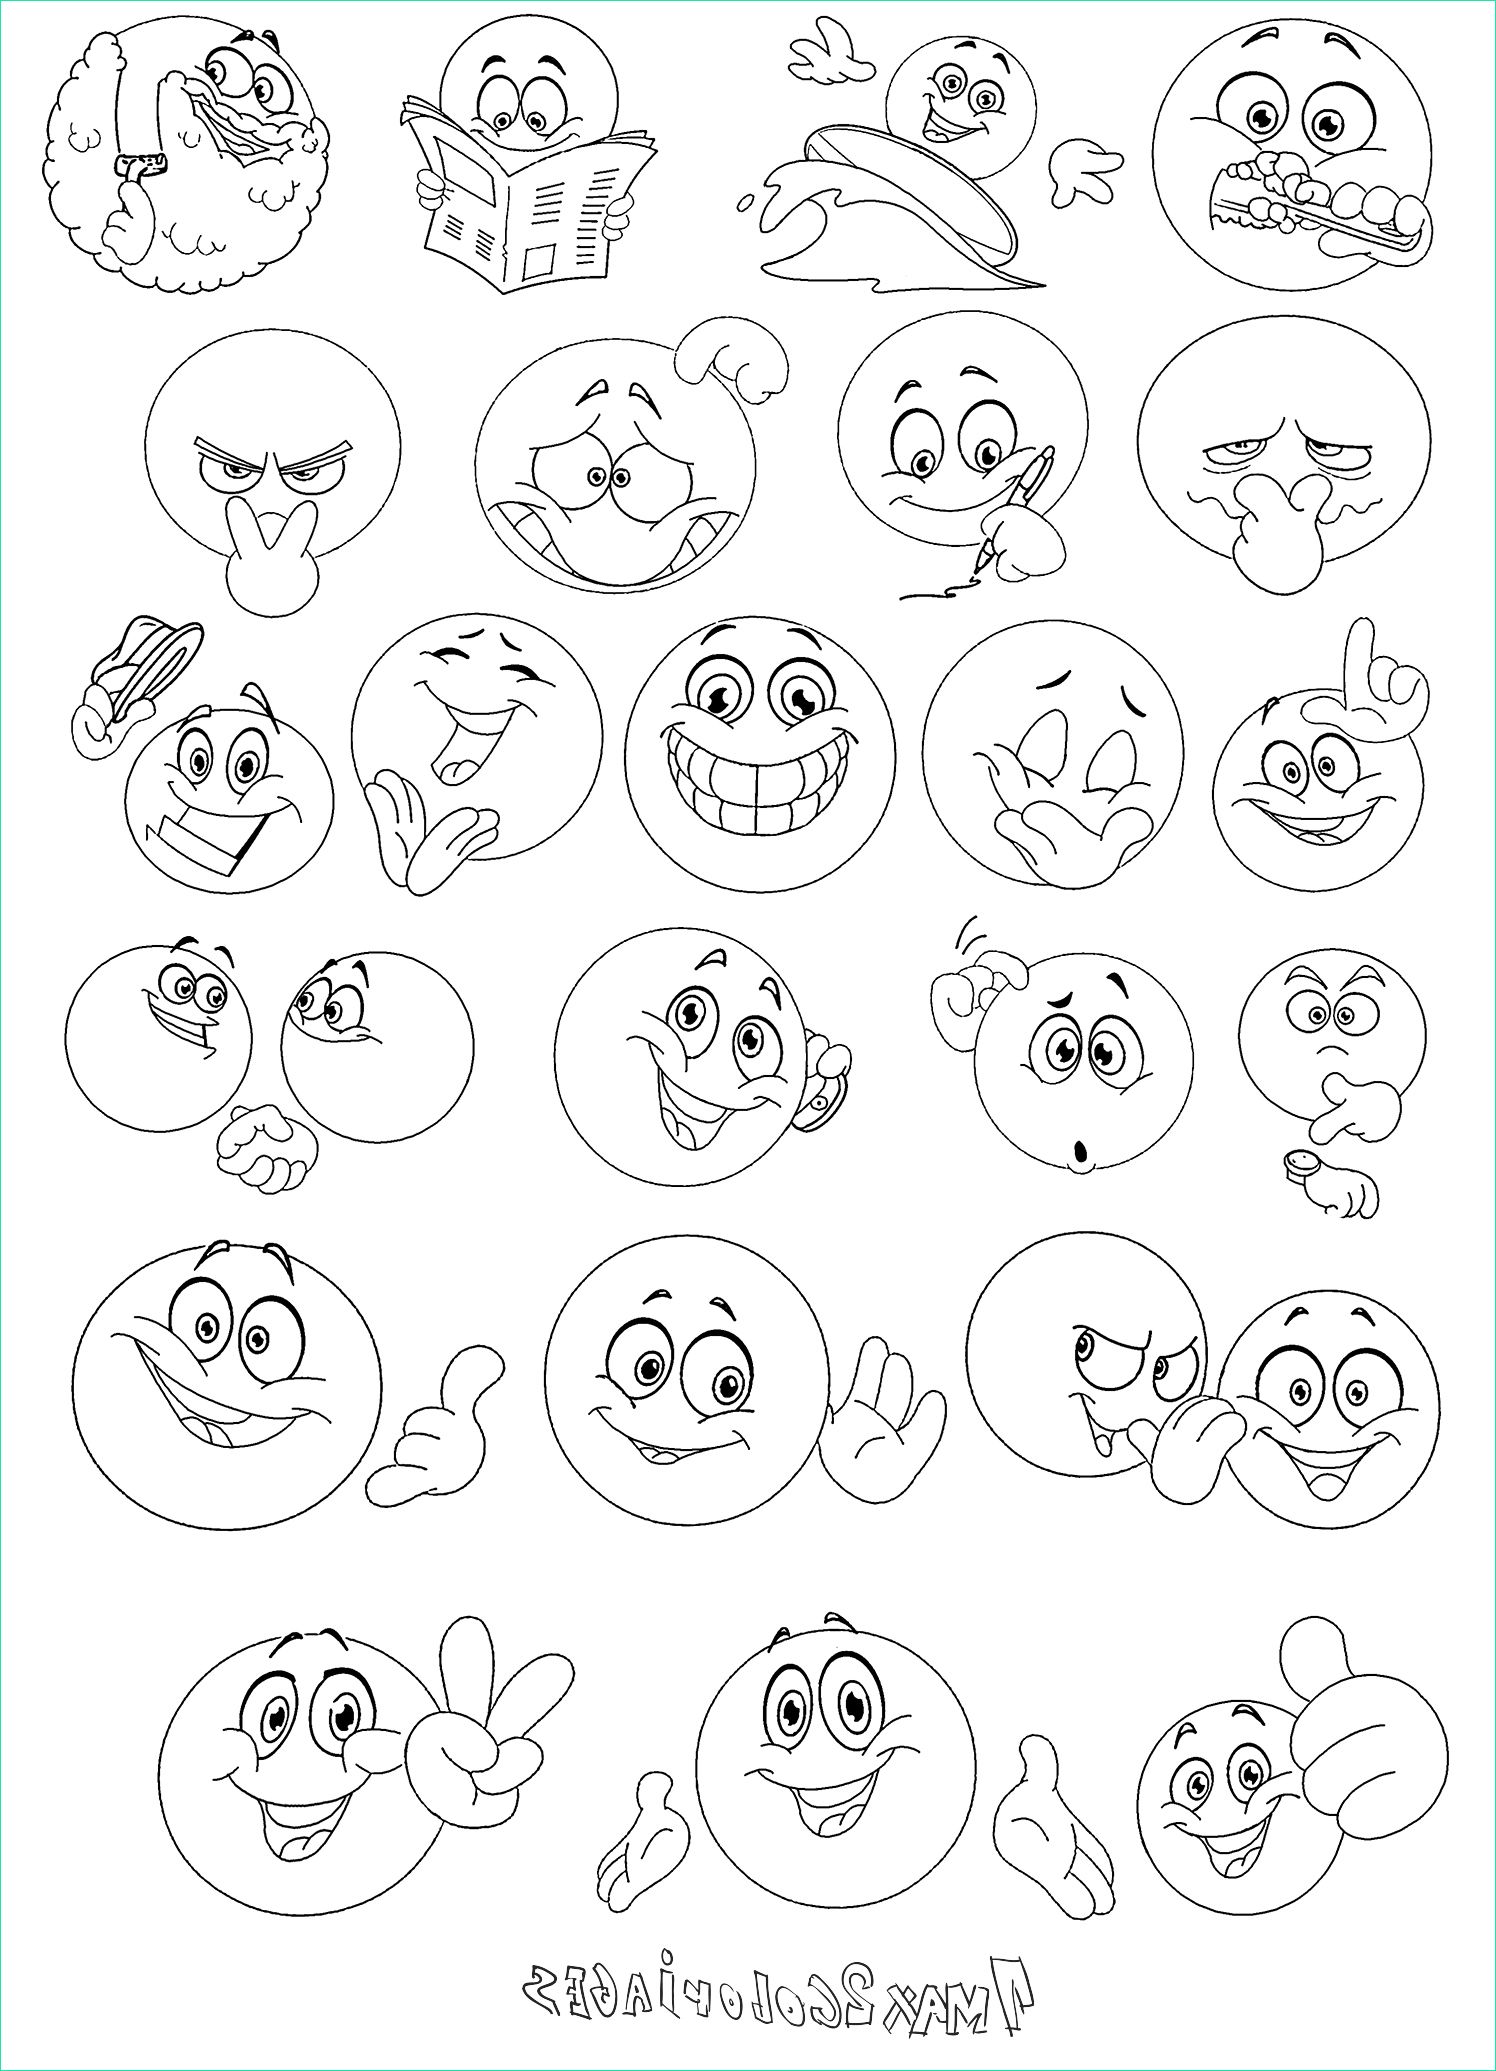 smileys coloriages